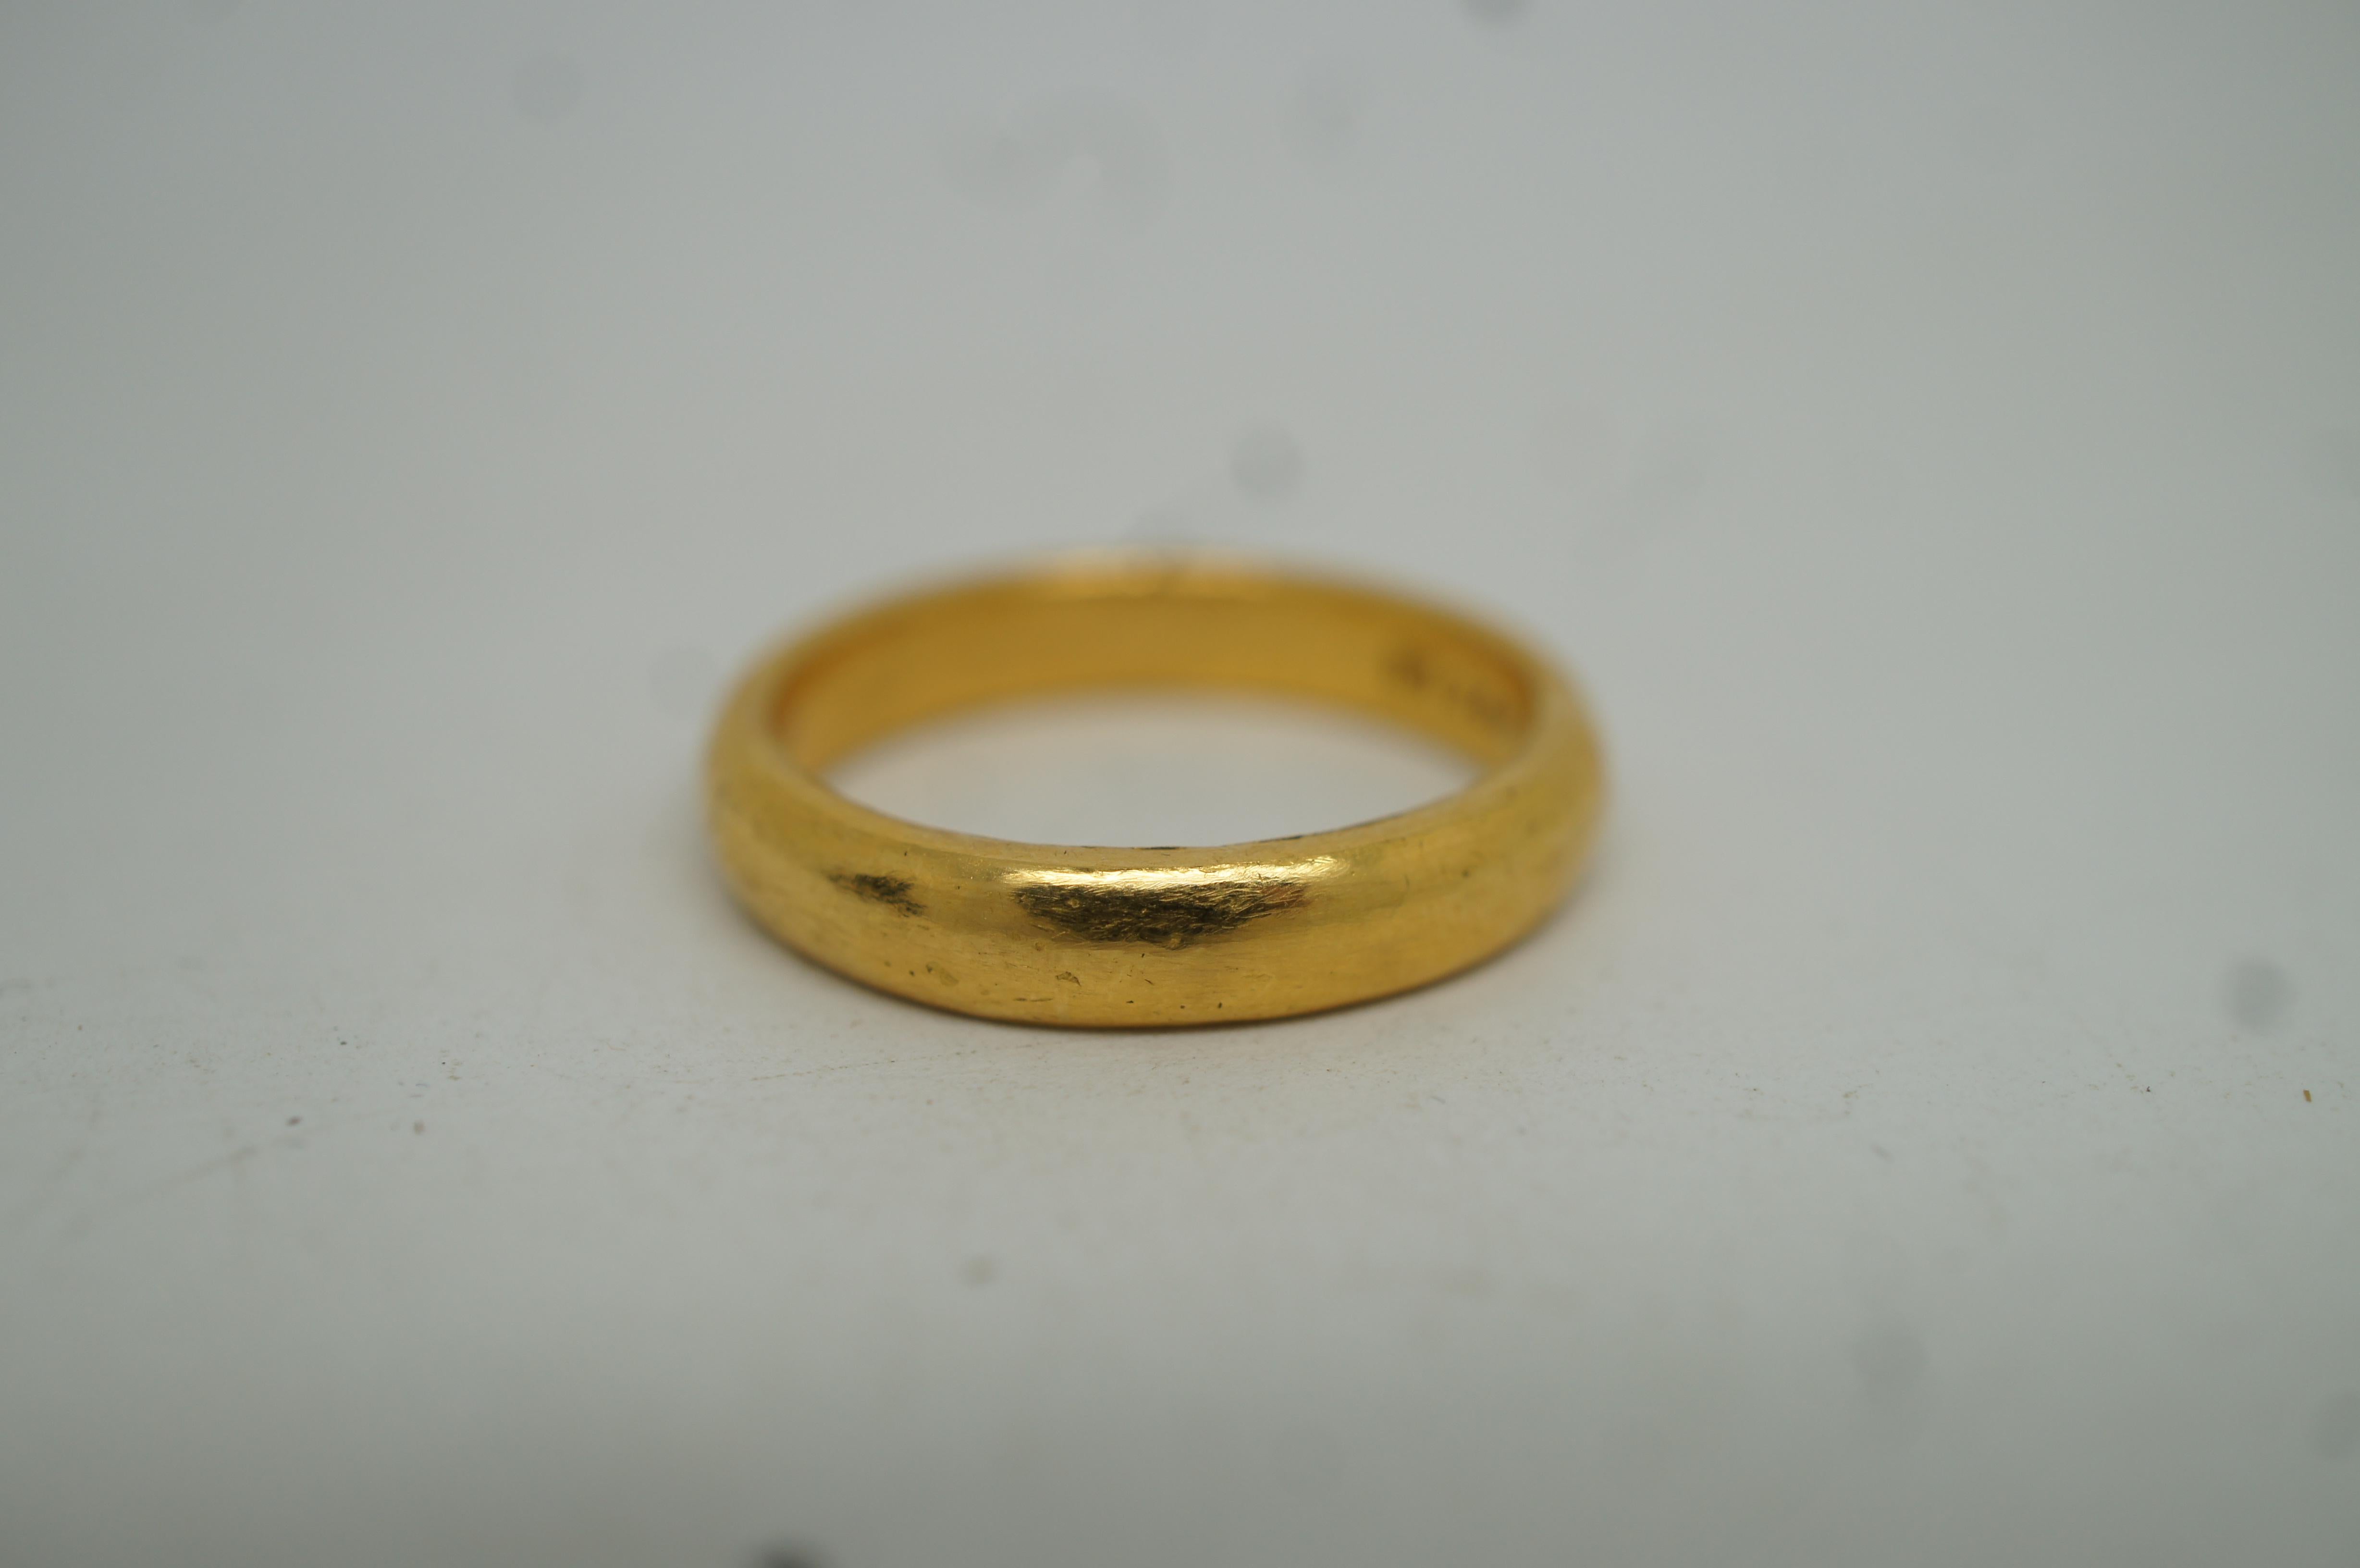 Vintage 24k Solid Yellow Gold Wedding Band Engagement Ring 10.5g For Sale 3